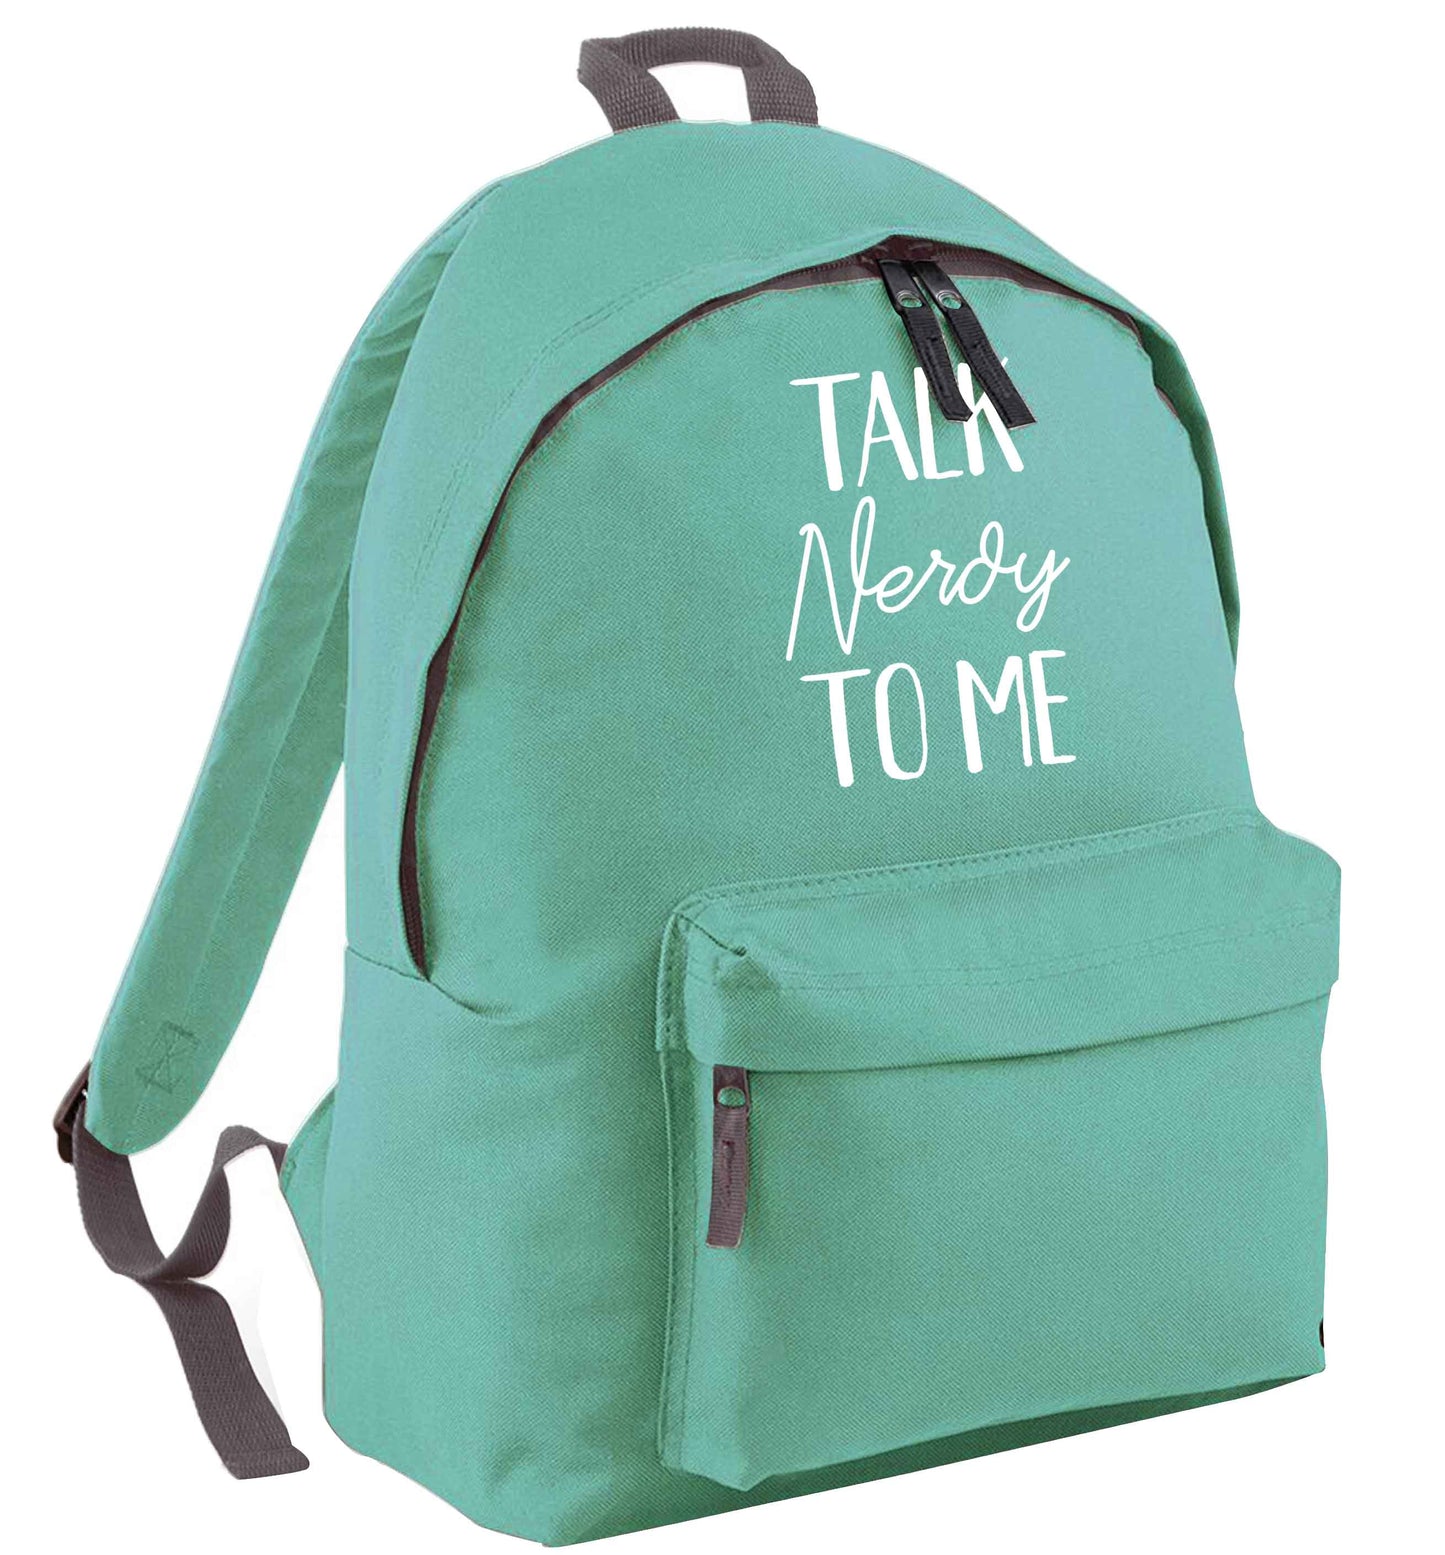 Talk nerdy to me mint adults backpack